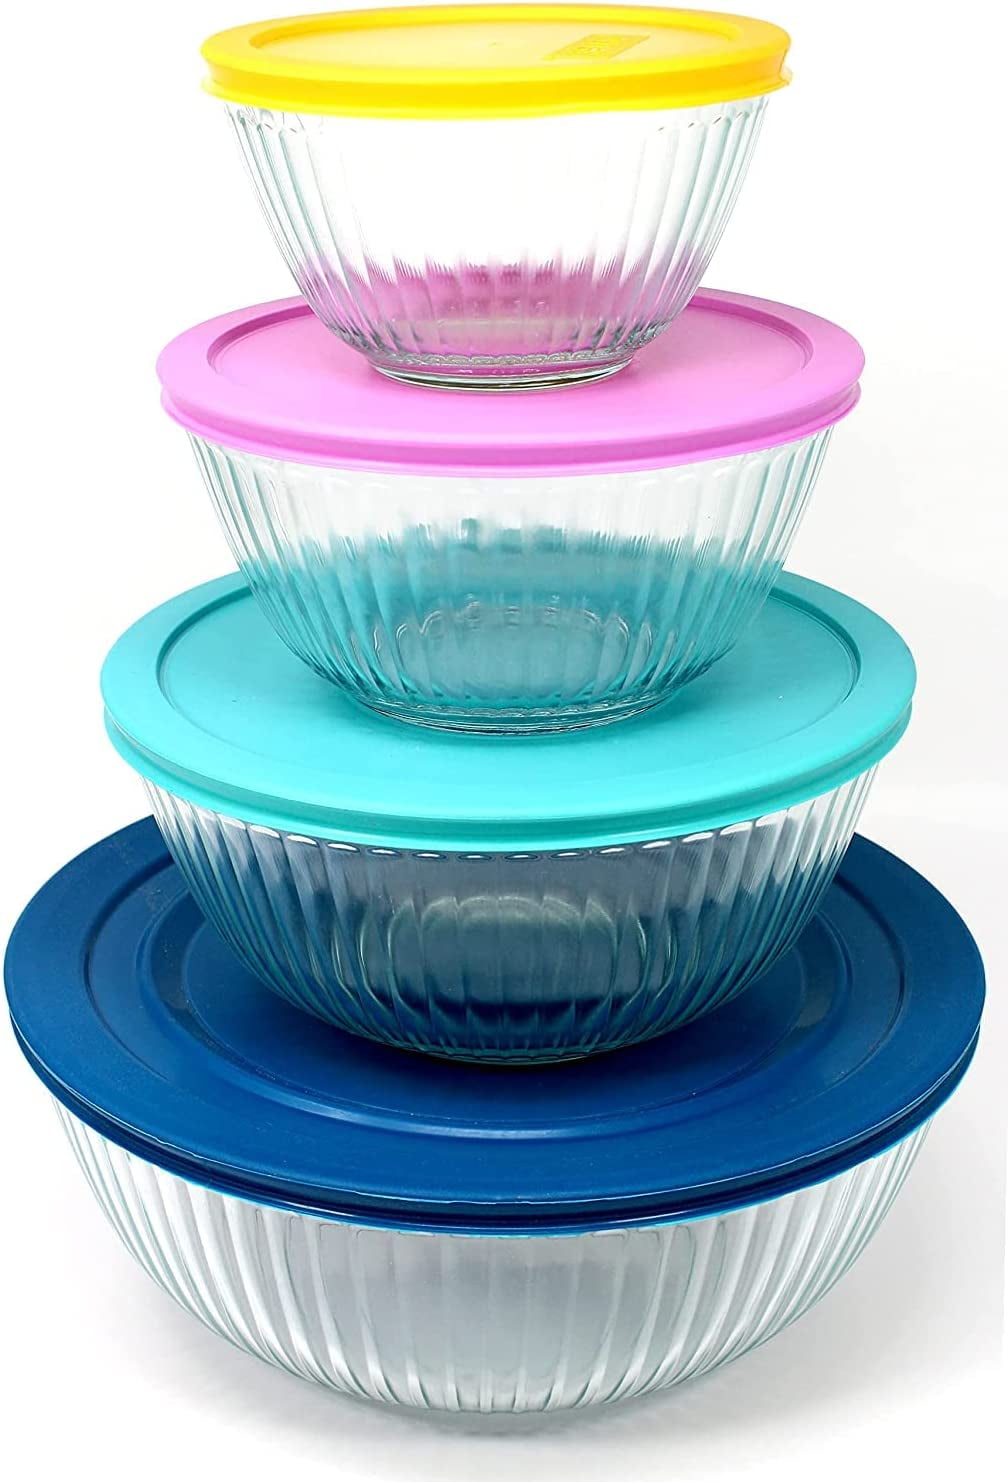 $8.99 for a Set of Patterned Glass Mixing Bowls with Lids